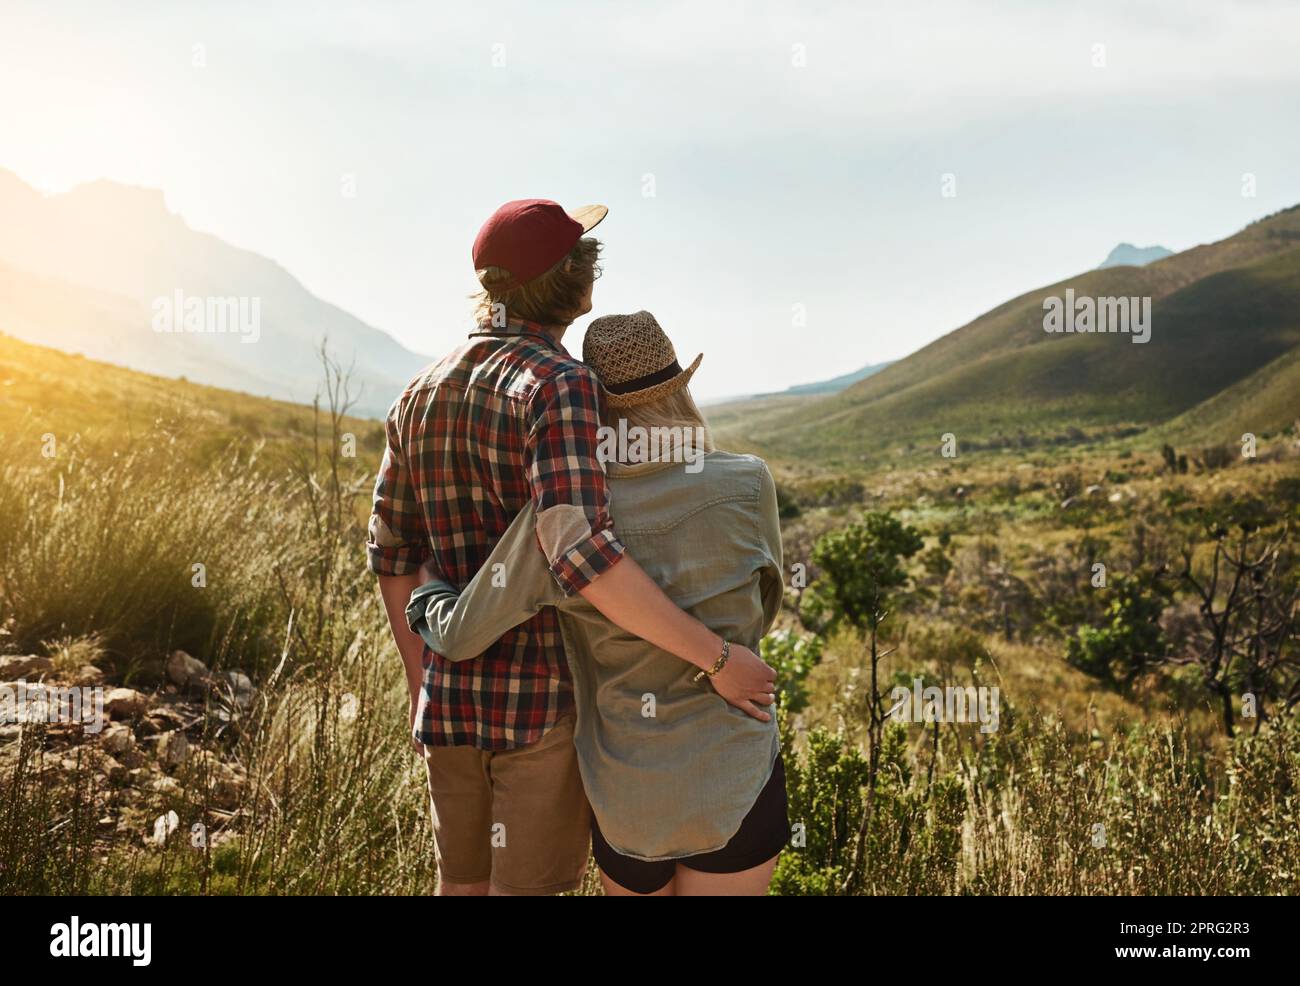 Climb a mountain to get to the good life. Rearview shot of a young couple admiring a mountainous view in nature. Stock Photo